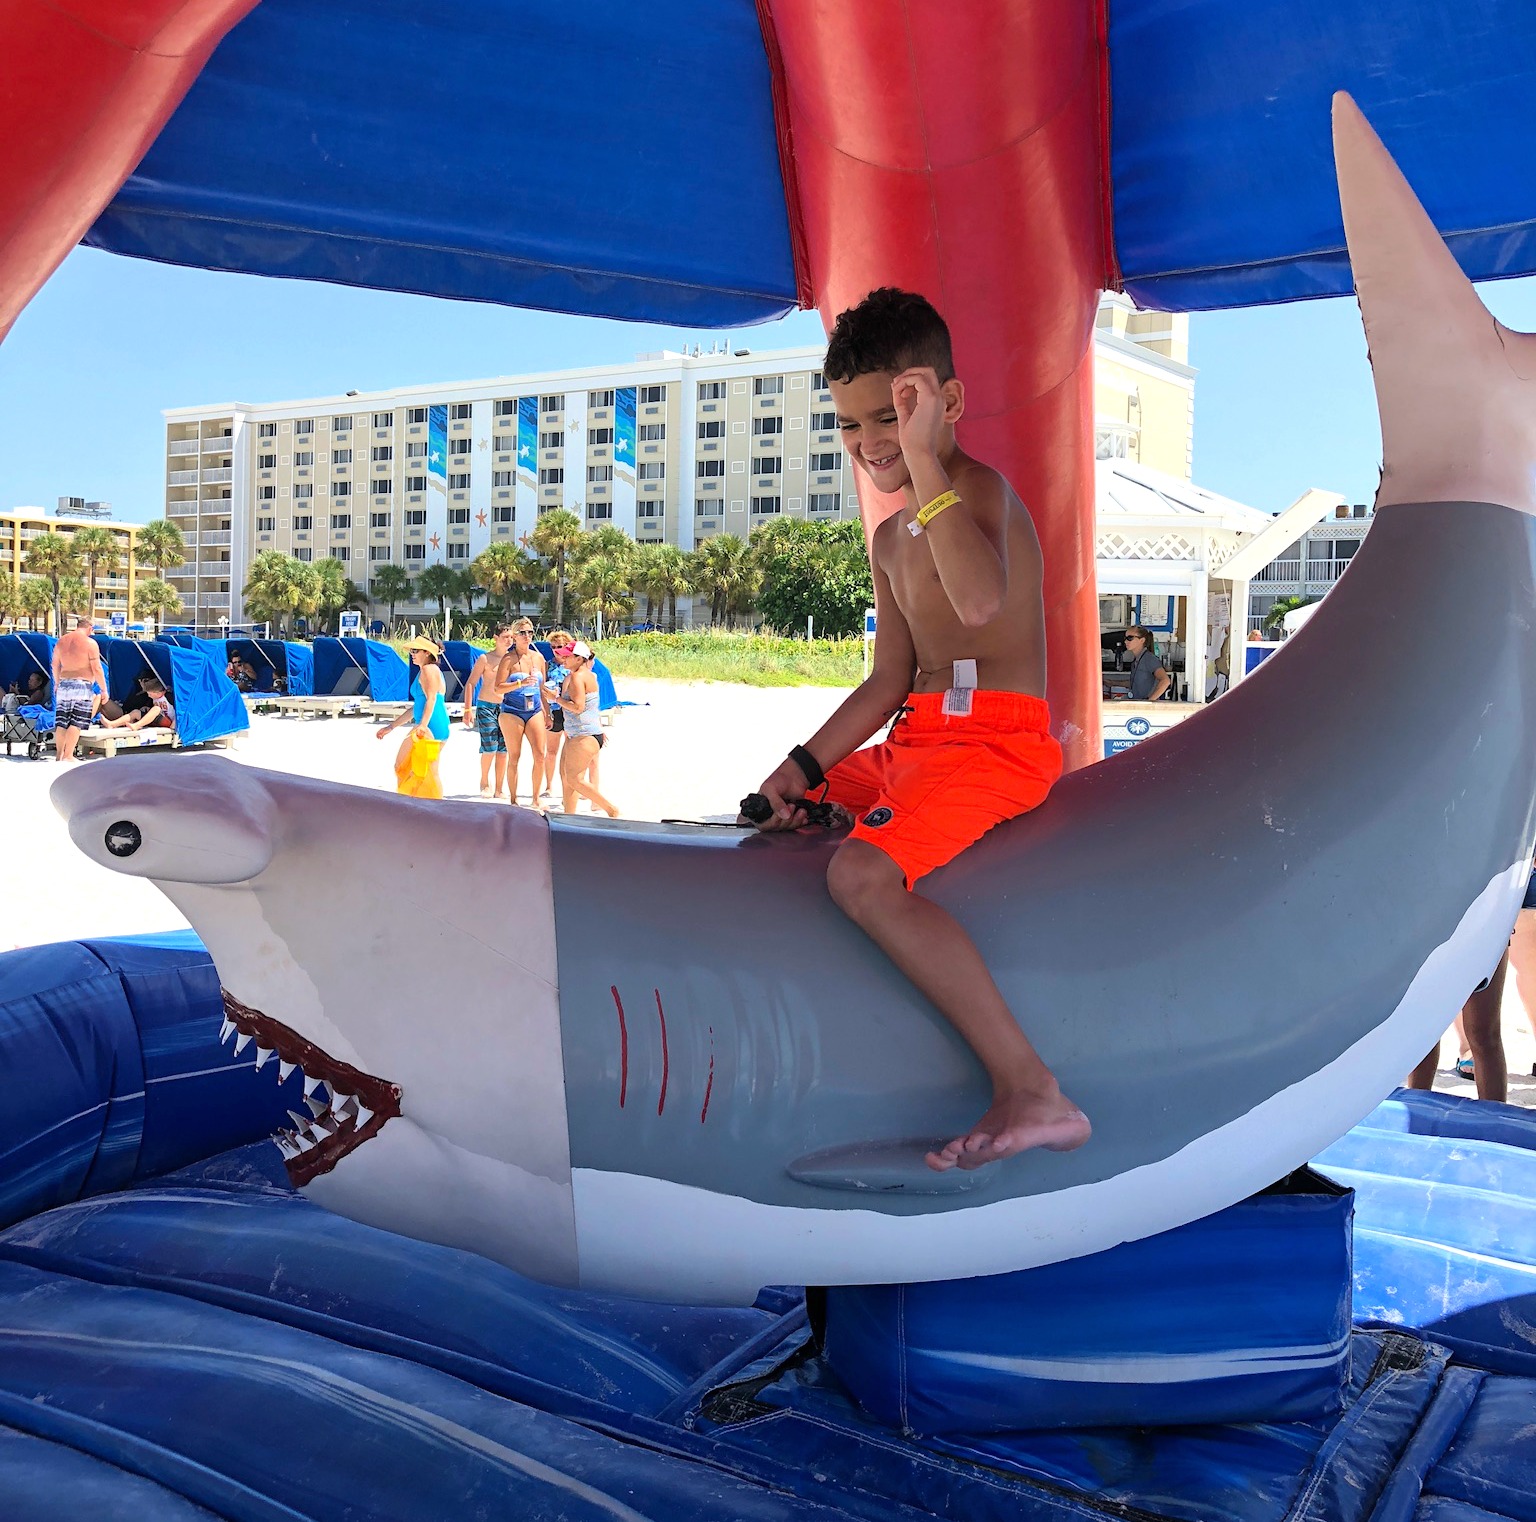 6 Reasons to Bring Your Family to TradeWinds Island Grand Resort